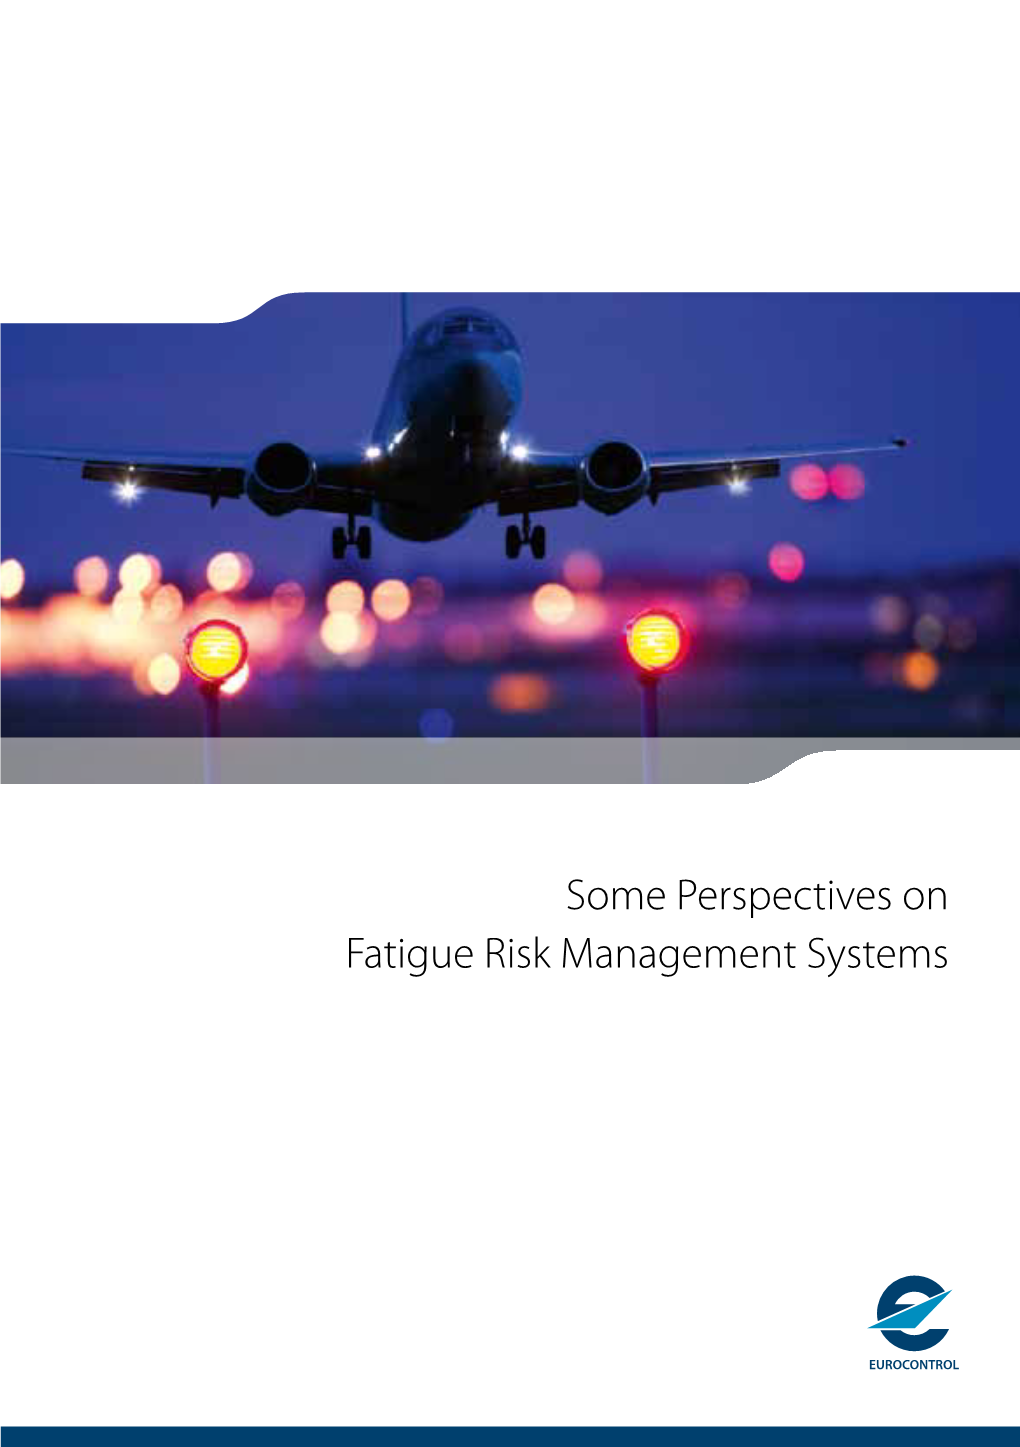 Some Perspectives on Fatigue Risk Management Systems